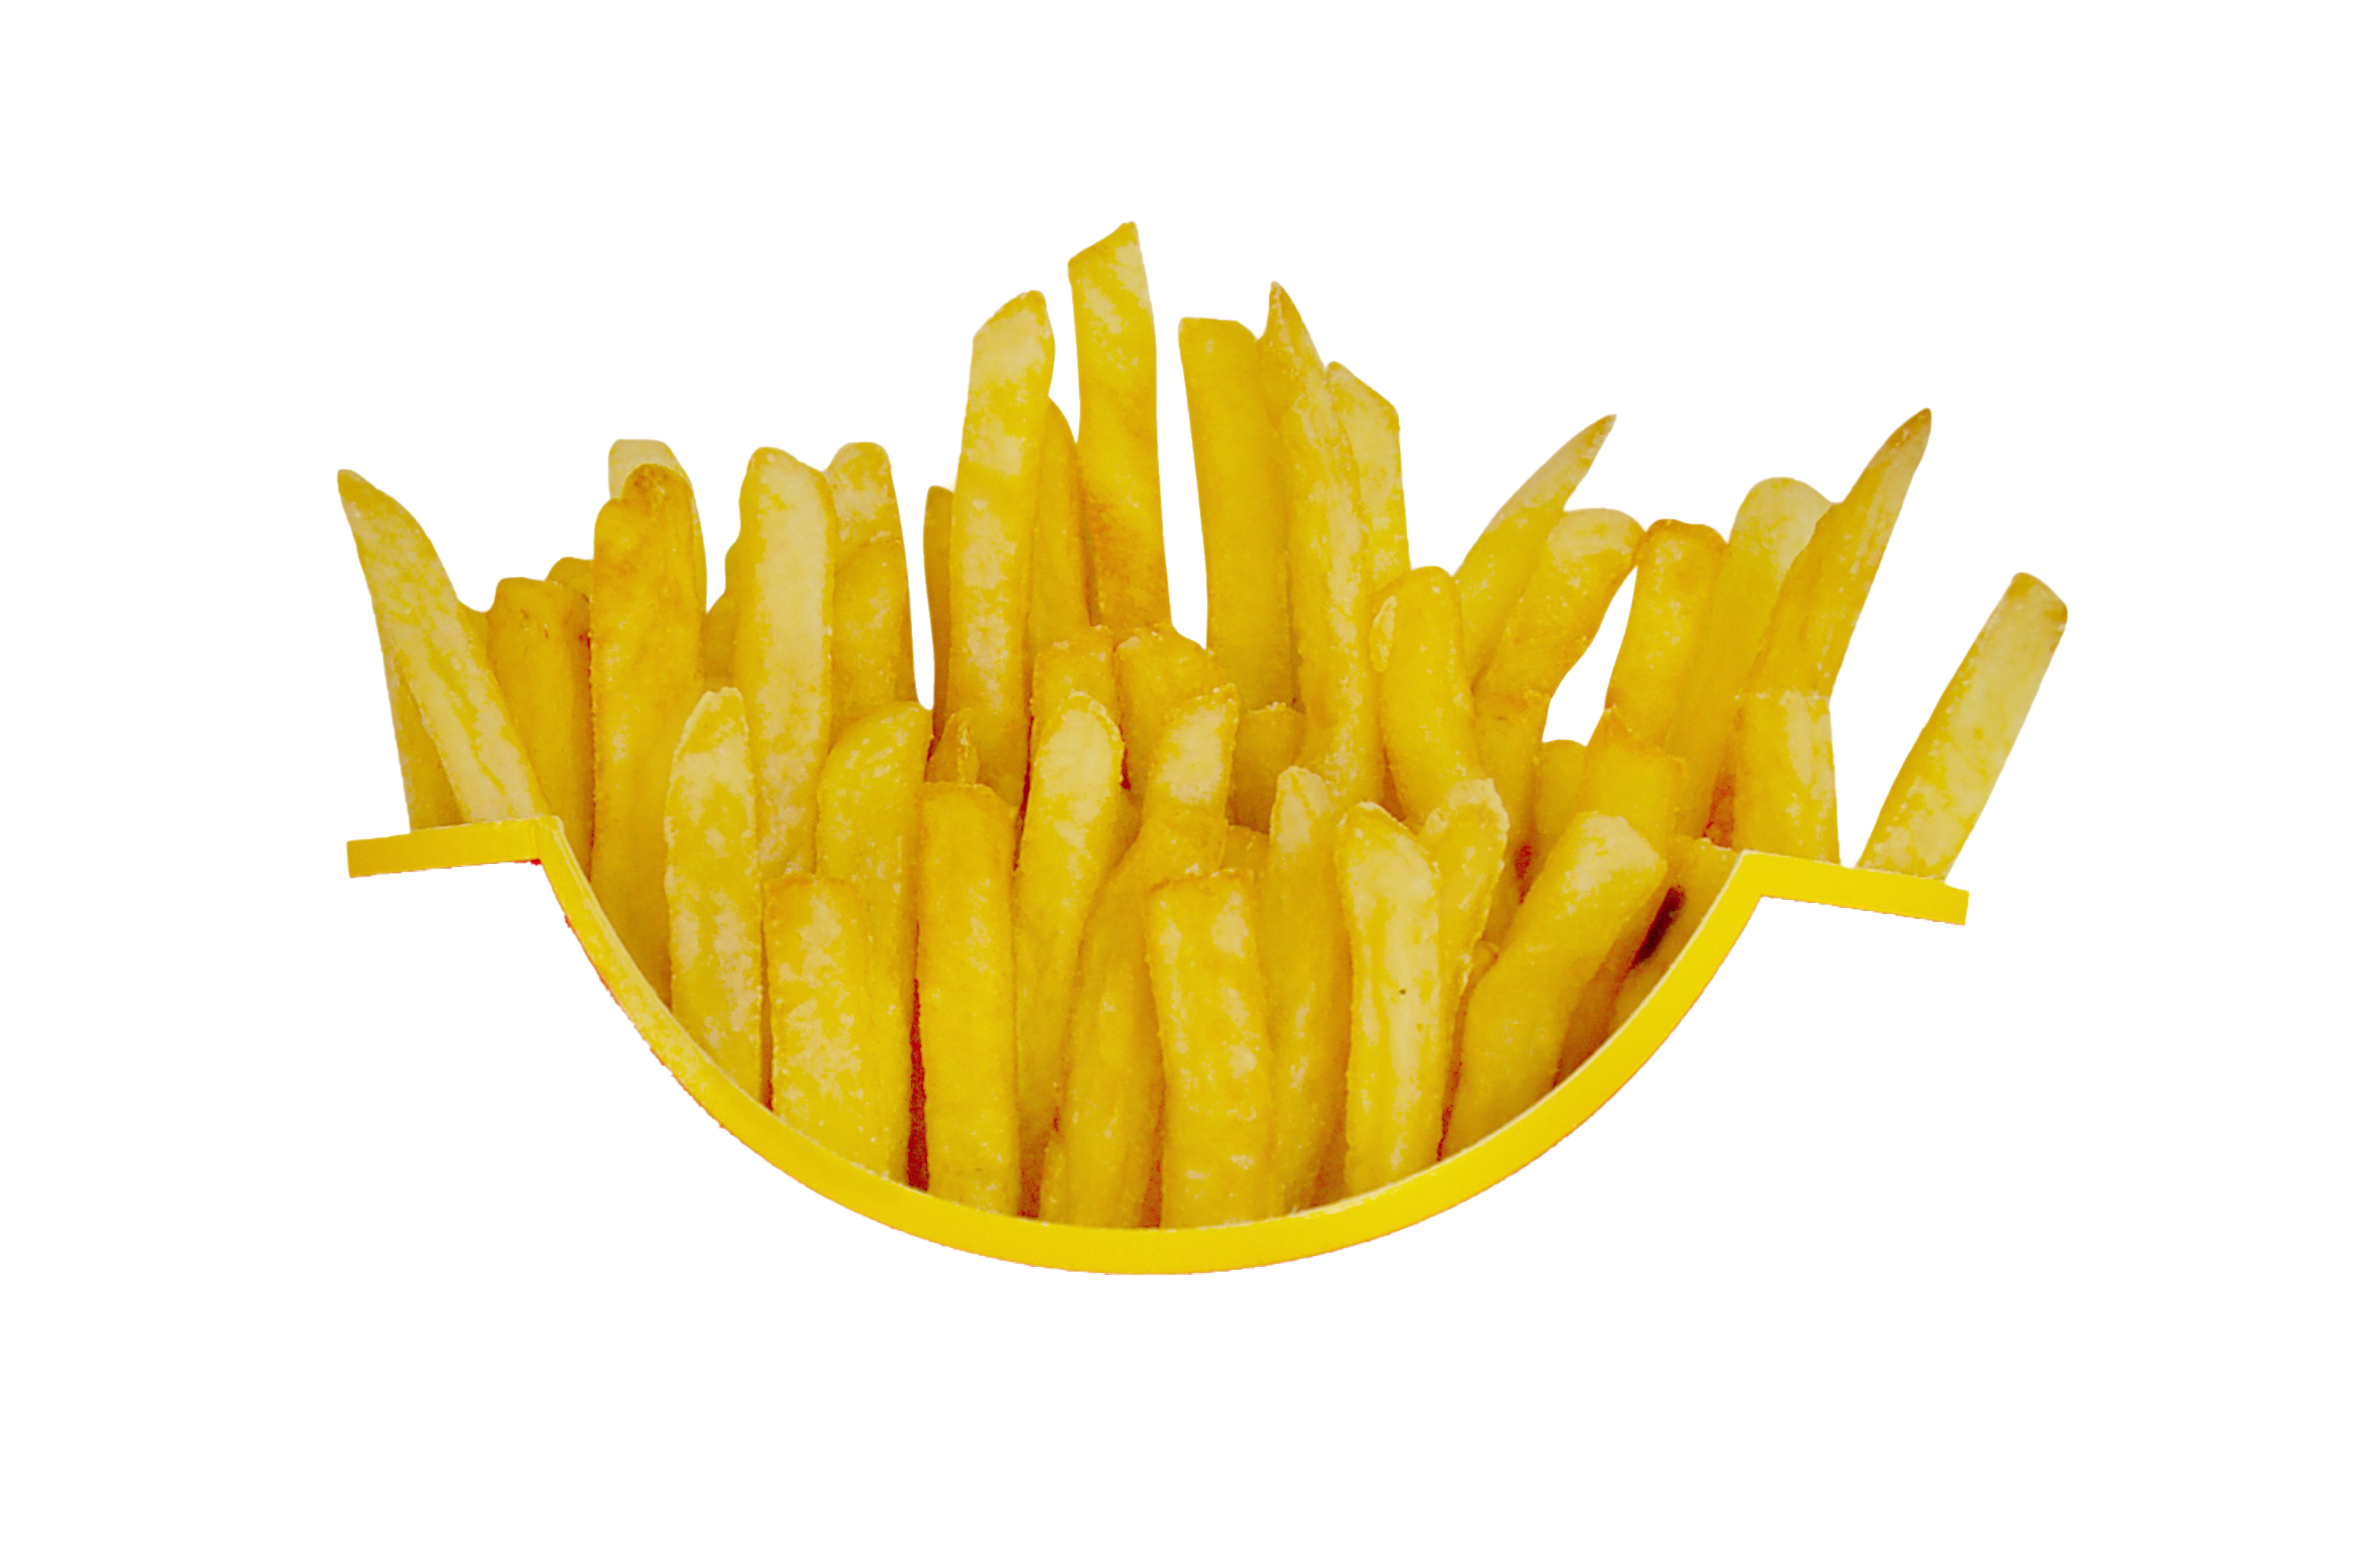 Crispy French Fries PNG Picture